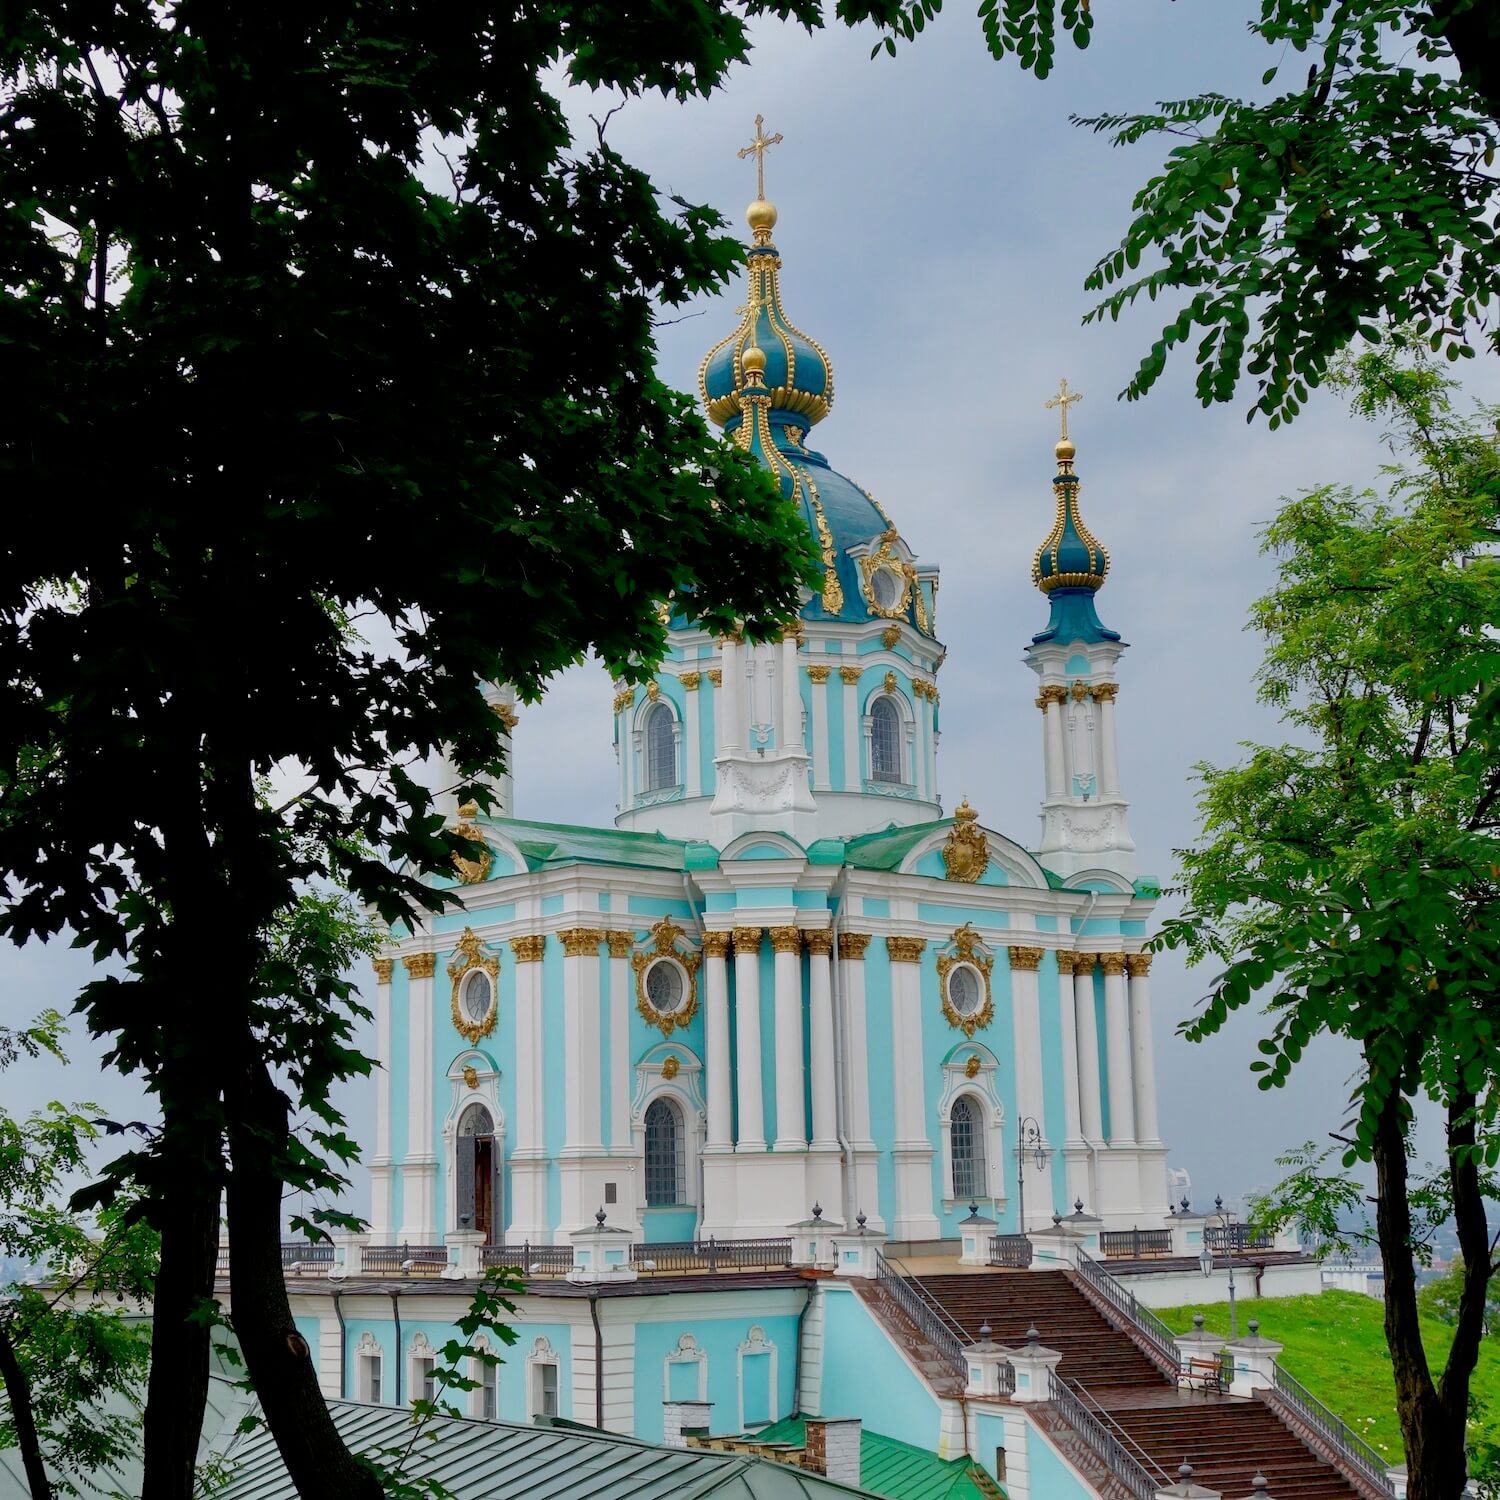 St. Andrew's church is one of the top 10 ways to experience Kiev in one day.  This green and blue walled Orthodox Church sits atop a hill overlooking the city.  